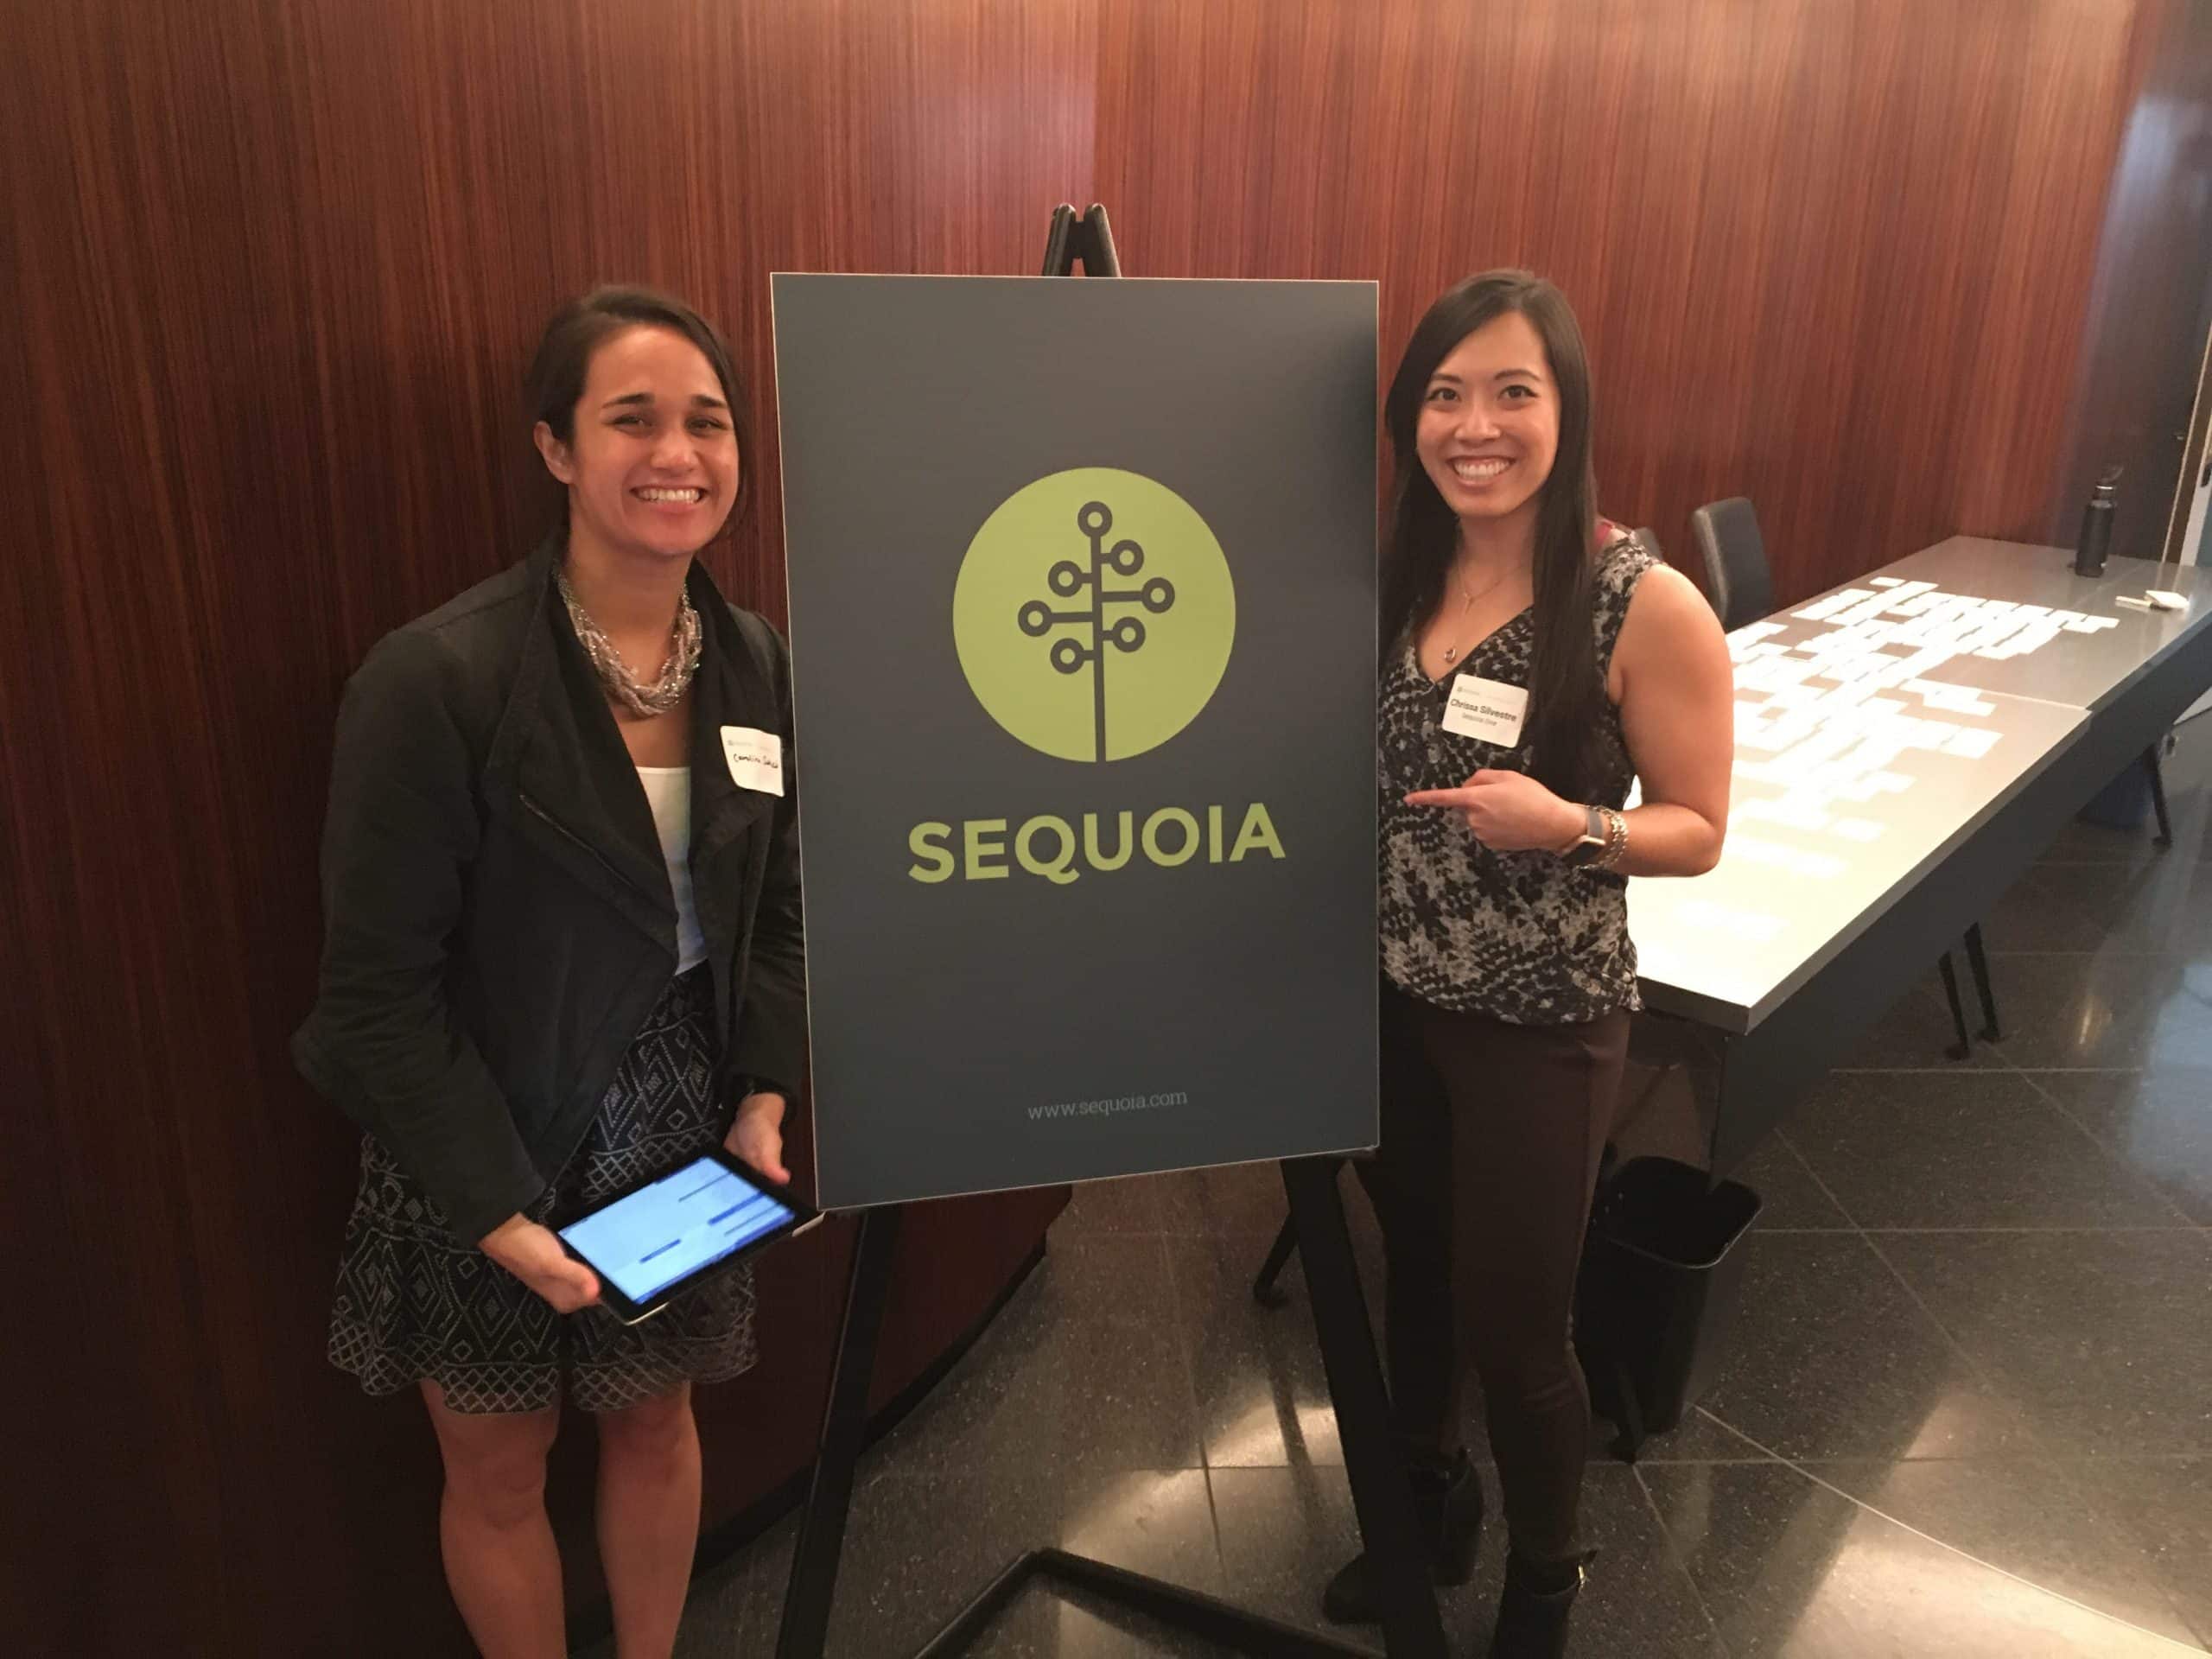 Sequoia One: The grove event takeaways